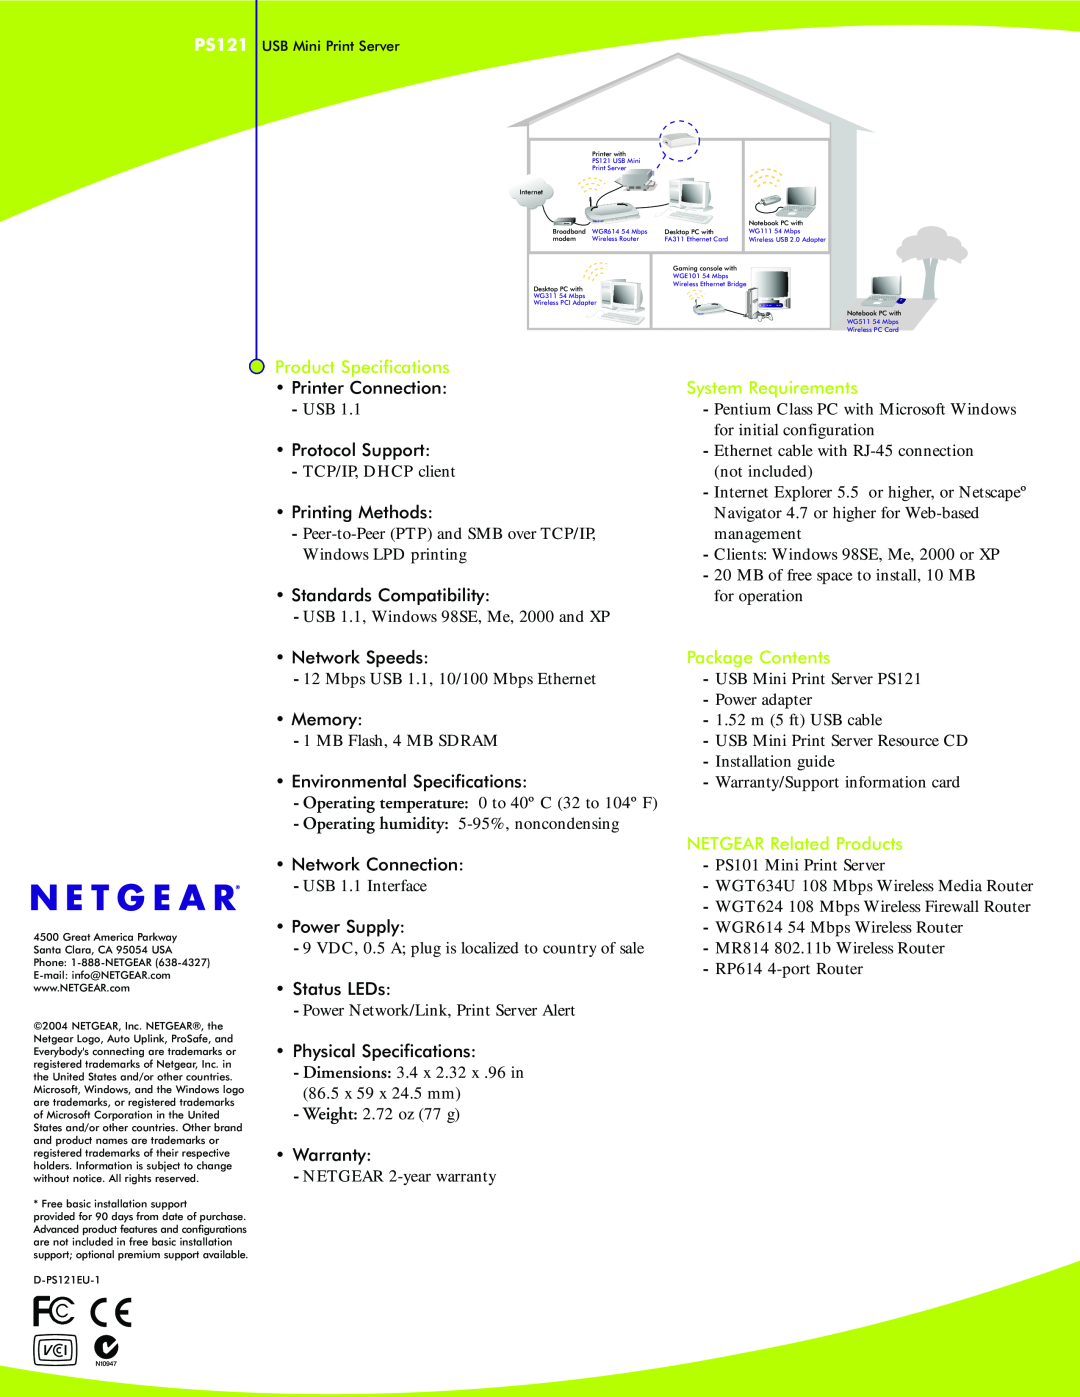 NETGEAR PS121 manual Product Specifications, System Requirements, Package Contents, Operating humidity 5-95%, noncondensing 